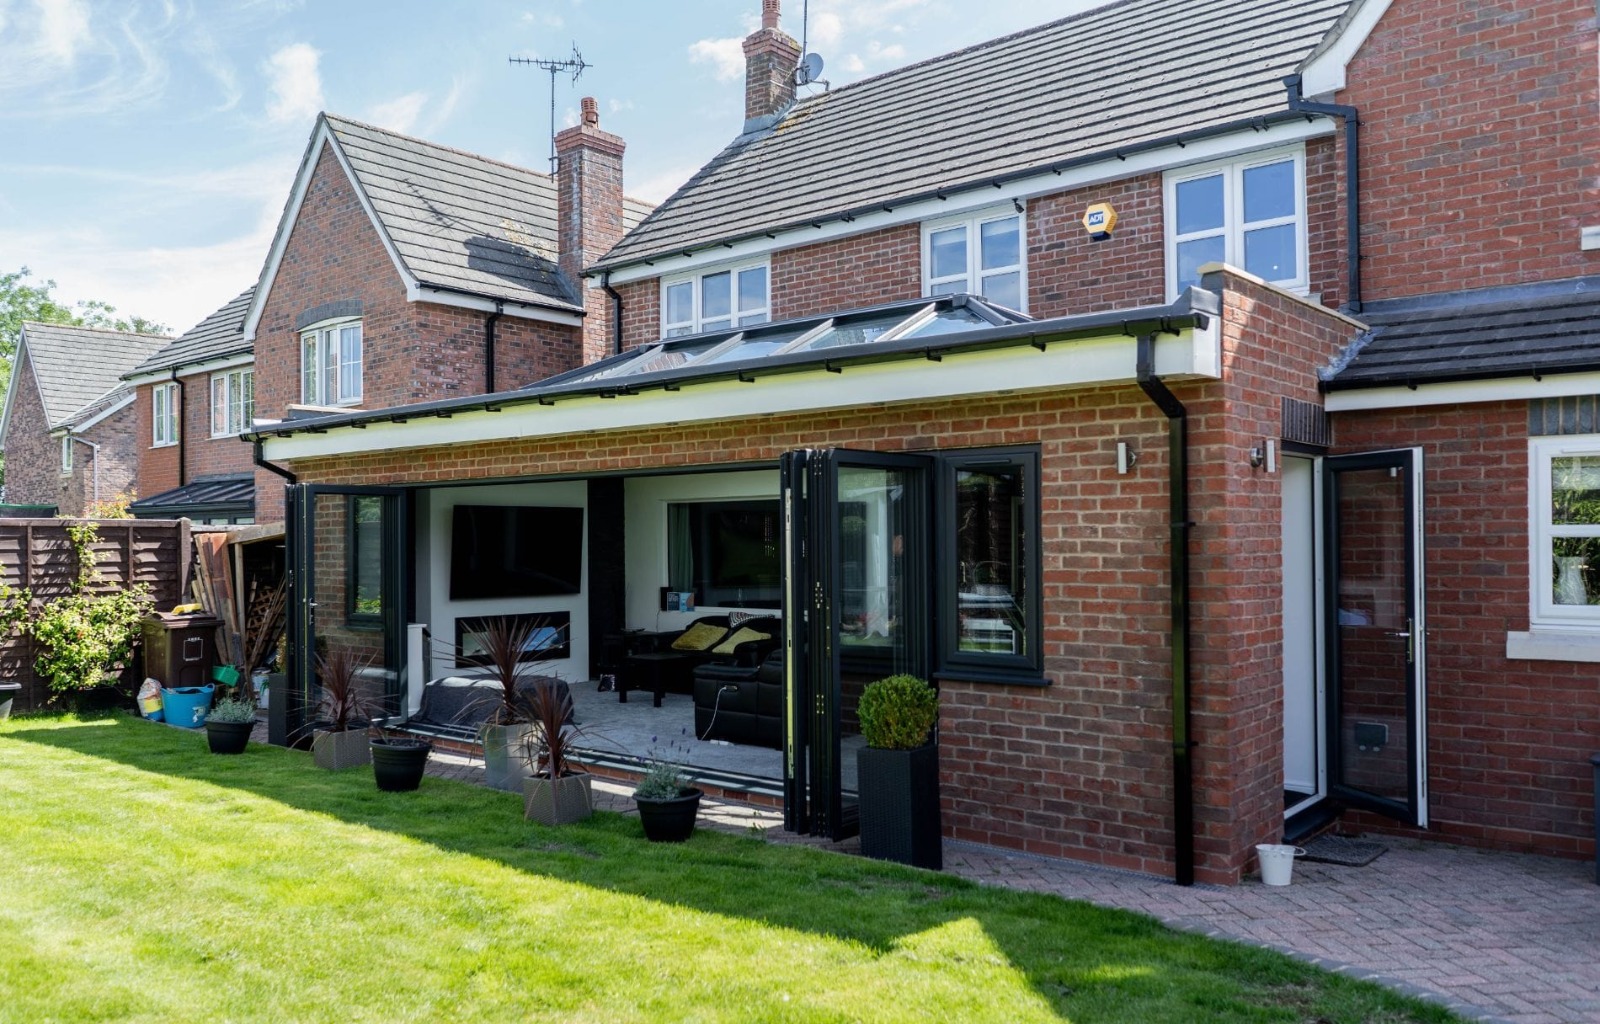 Small Conservatory Ideas For 2020 - West Midlands Double Glazing